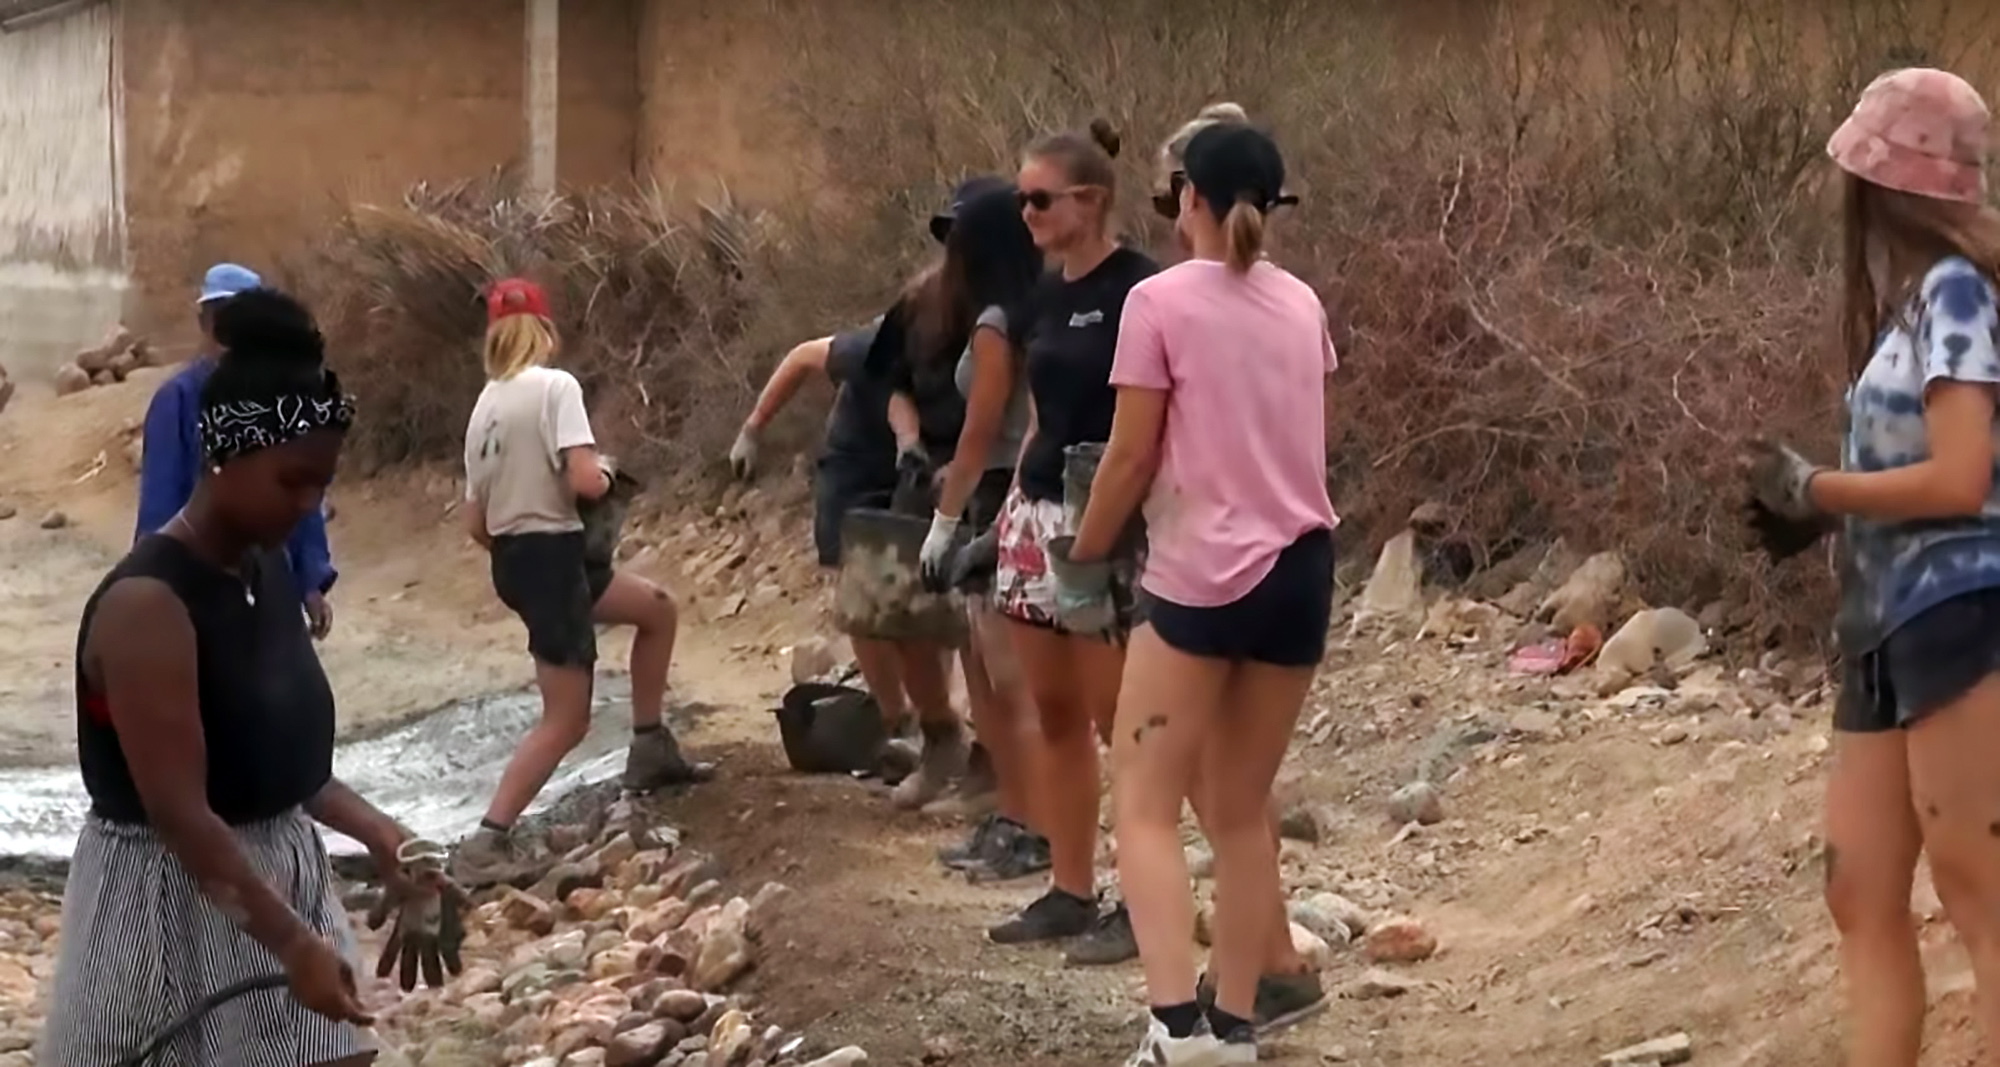 Morocco Teach: Tourists In Hotpants Should Be Beheaded.